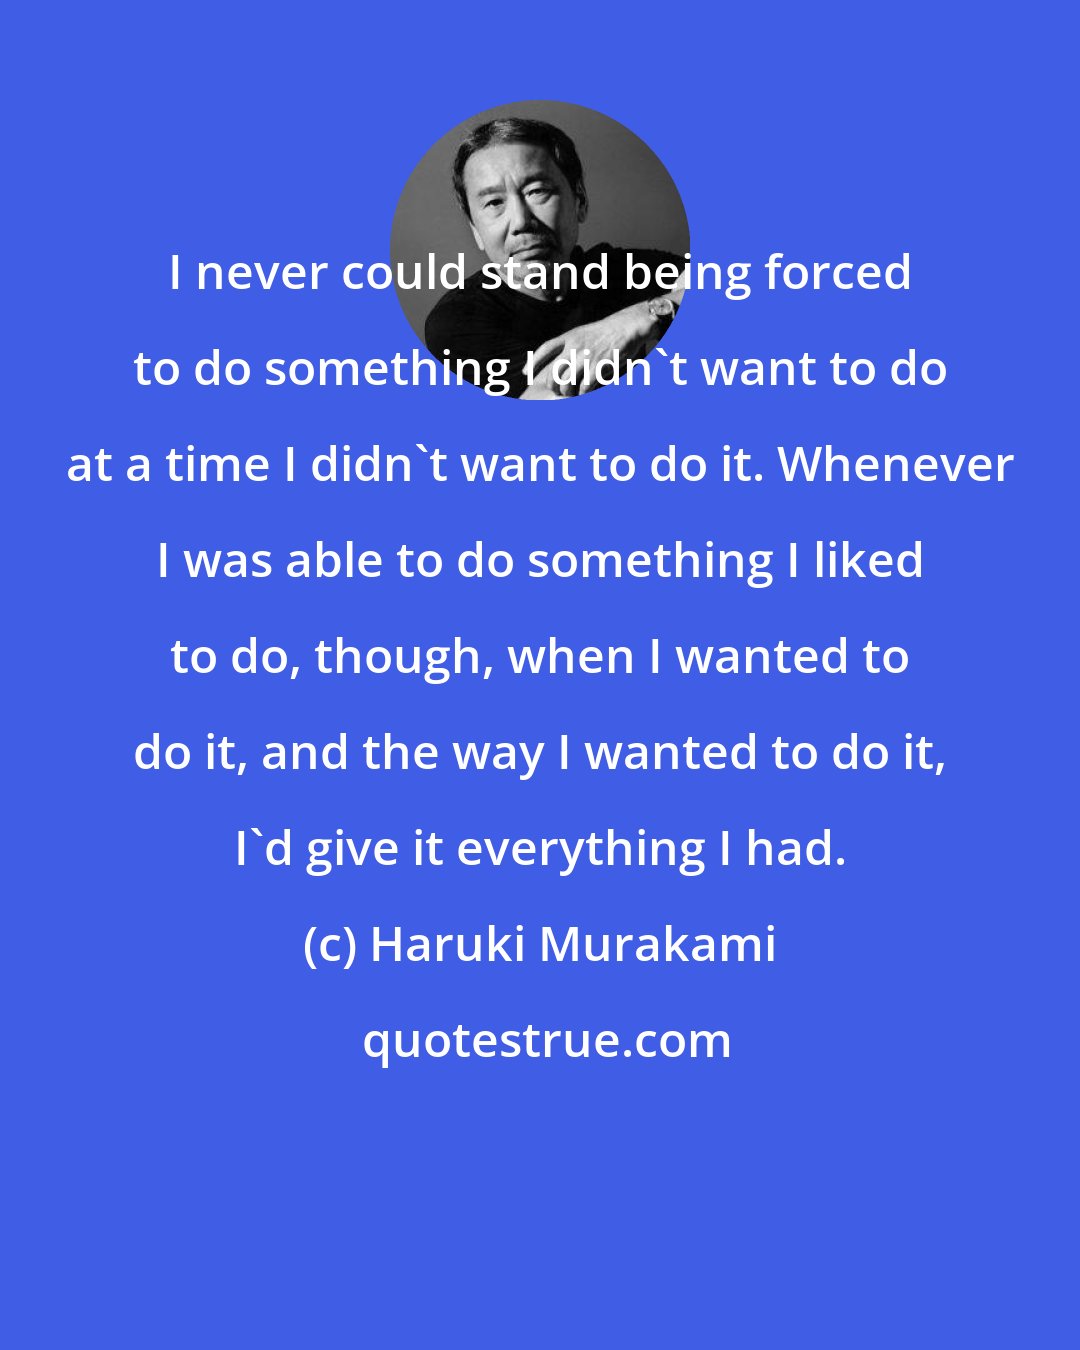 Haruki Murakami: I never could stand being forced to do something I didn't want to do at a time I didn't want to do it. Whenever I was able to do something I liked to do, though, when I wanted to do it, and the way I wanted to do it, I'd give it everything I had.